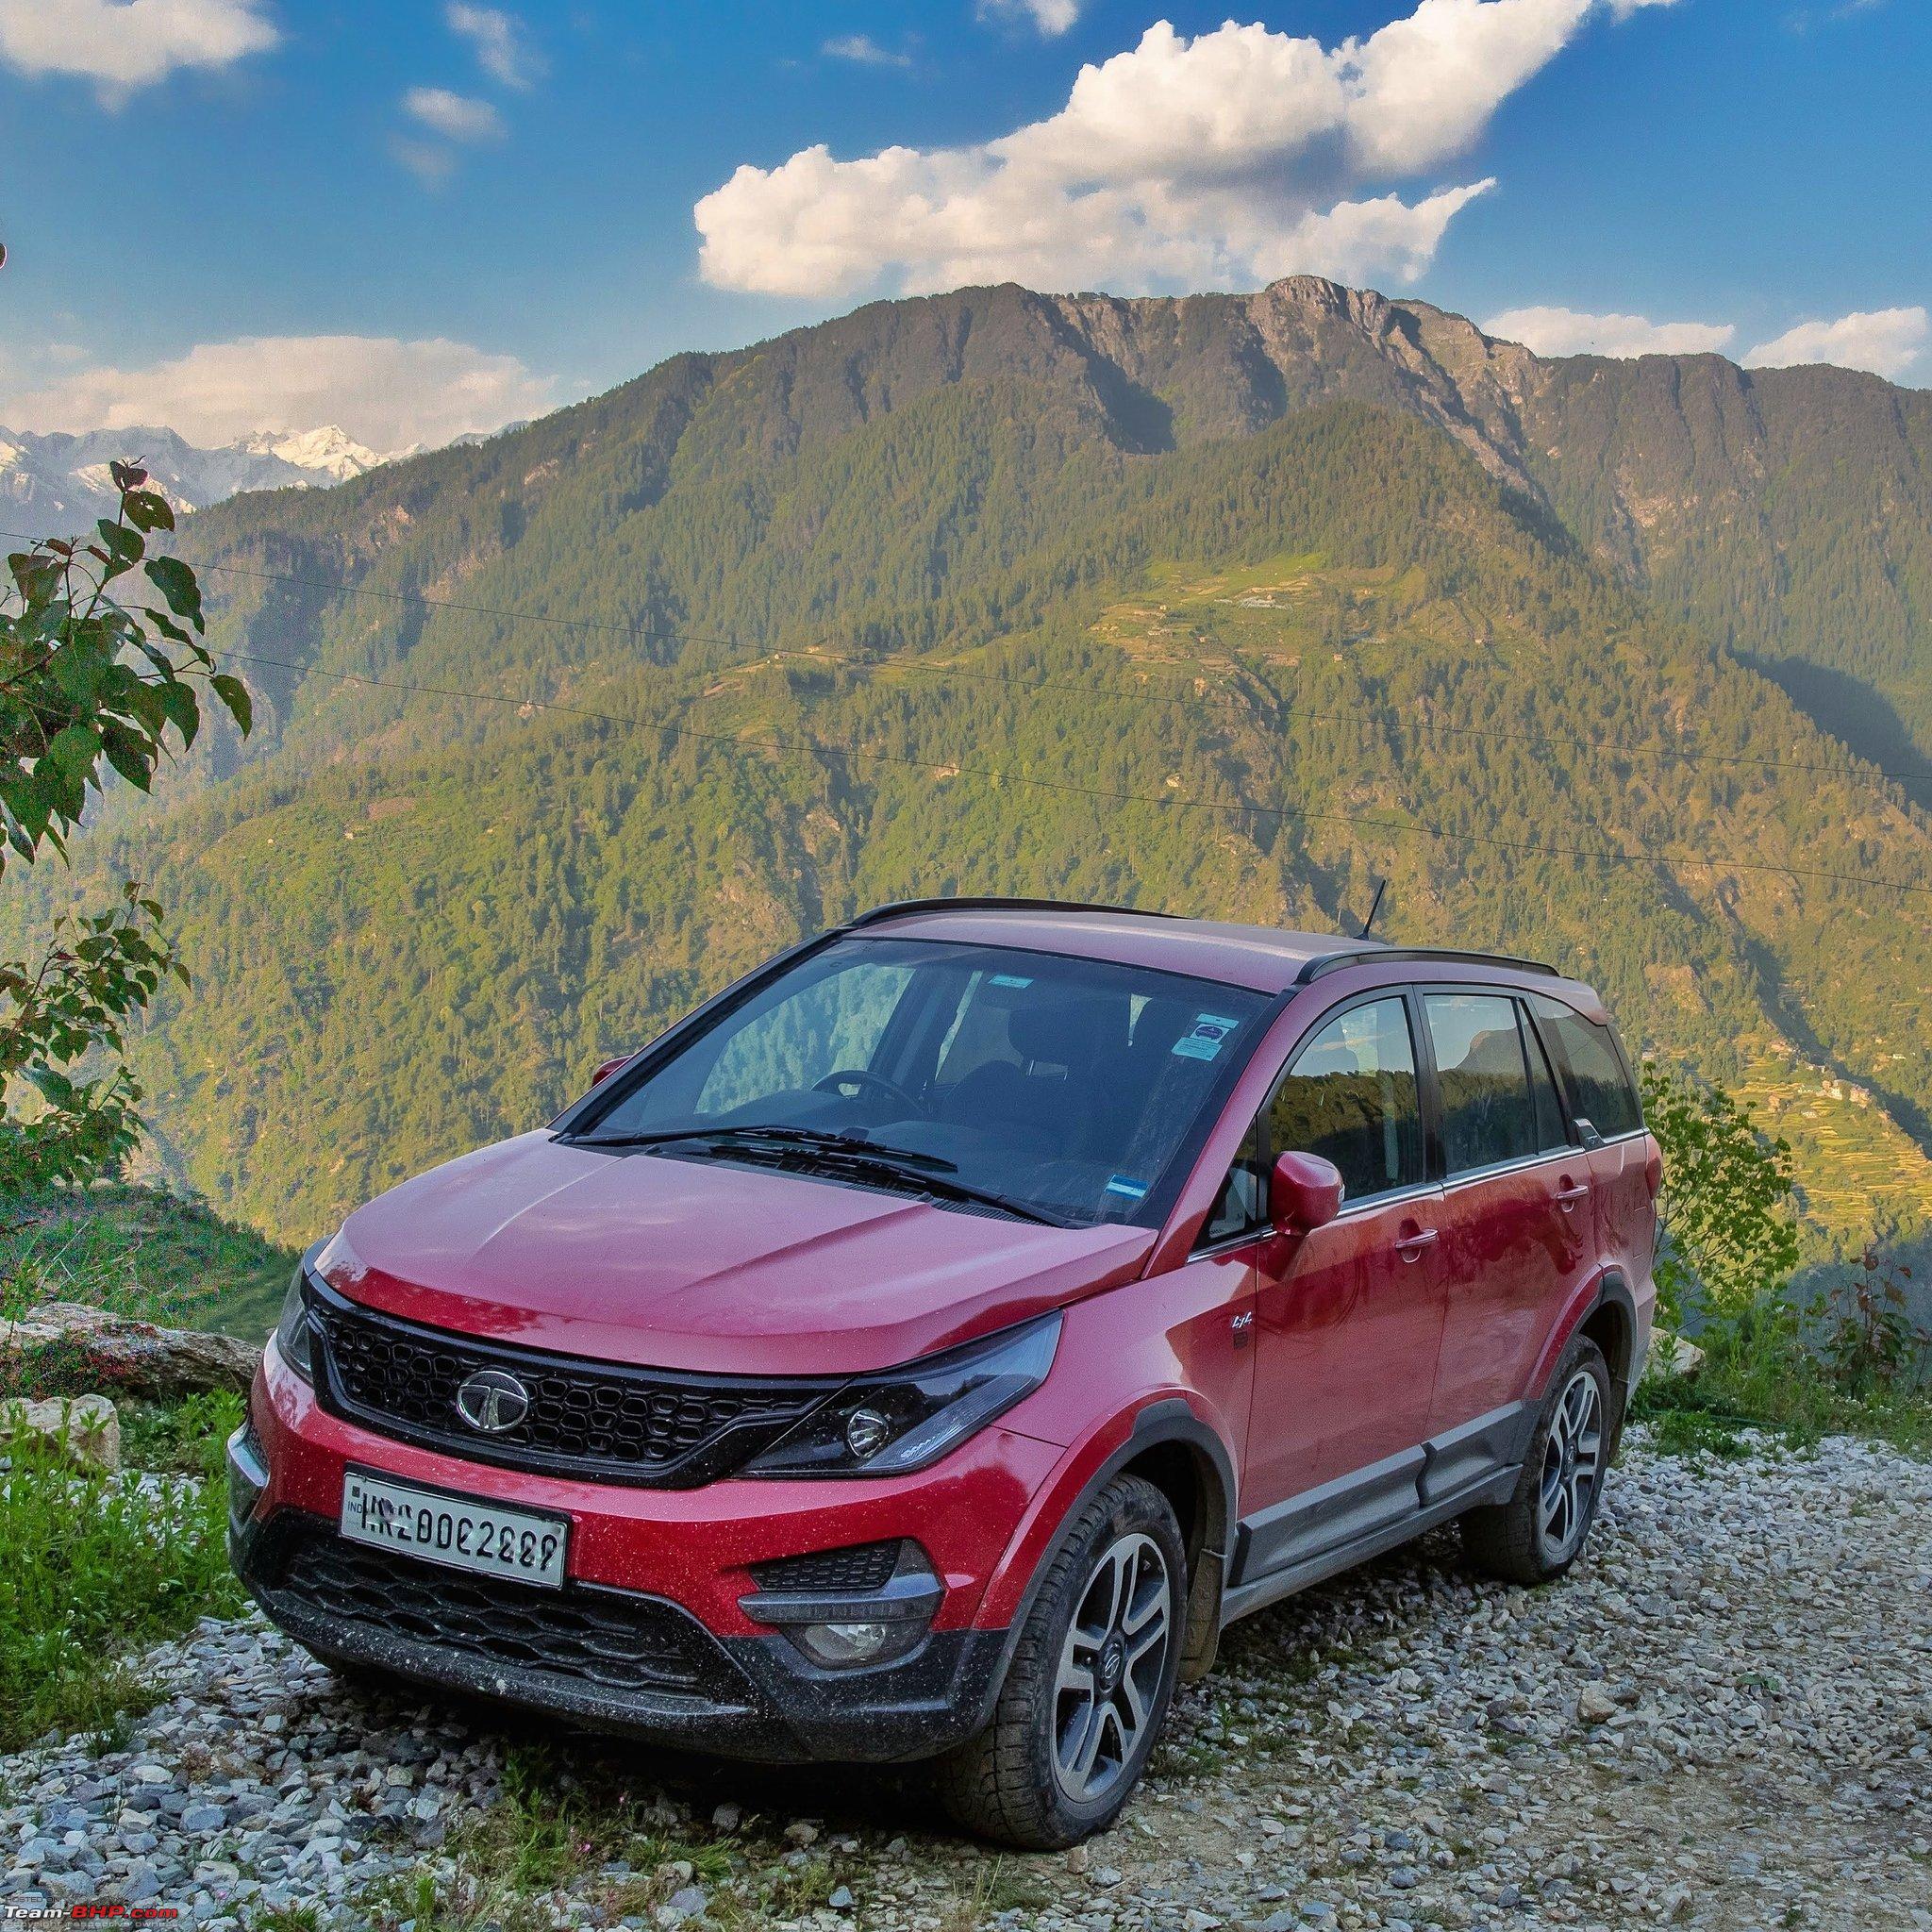 Tata Hexa : Official Review - Page 337 - Team-BHP